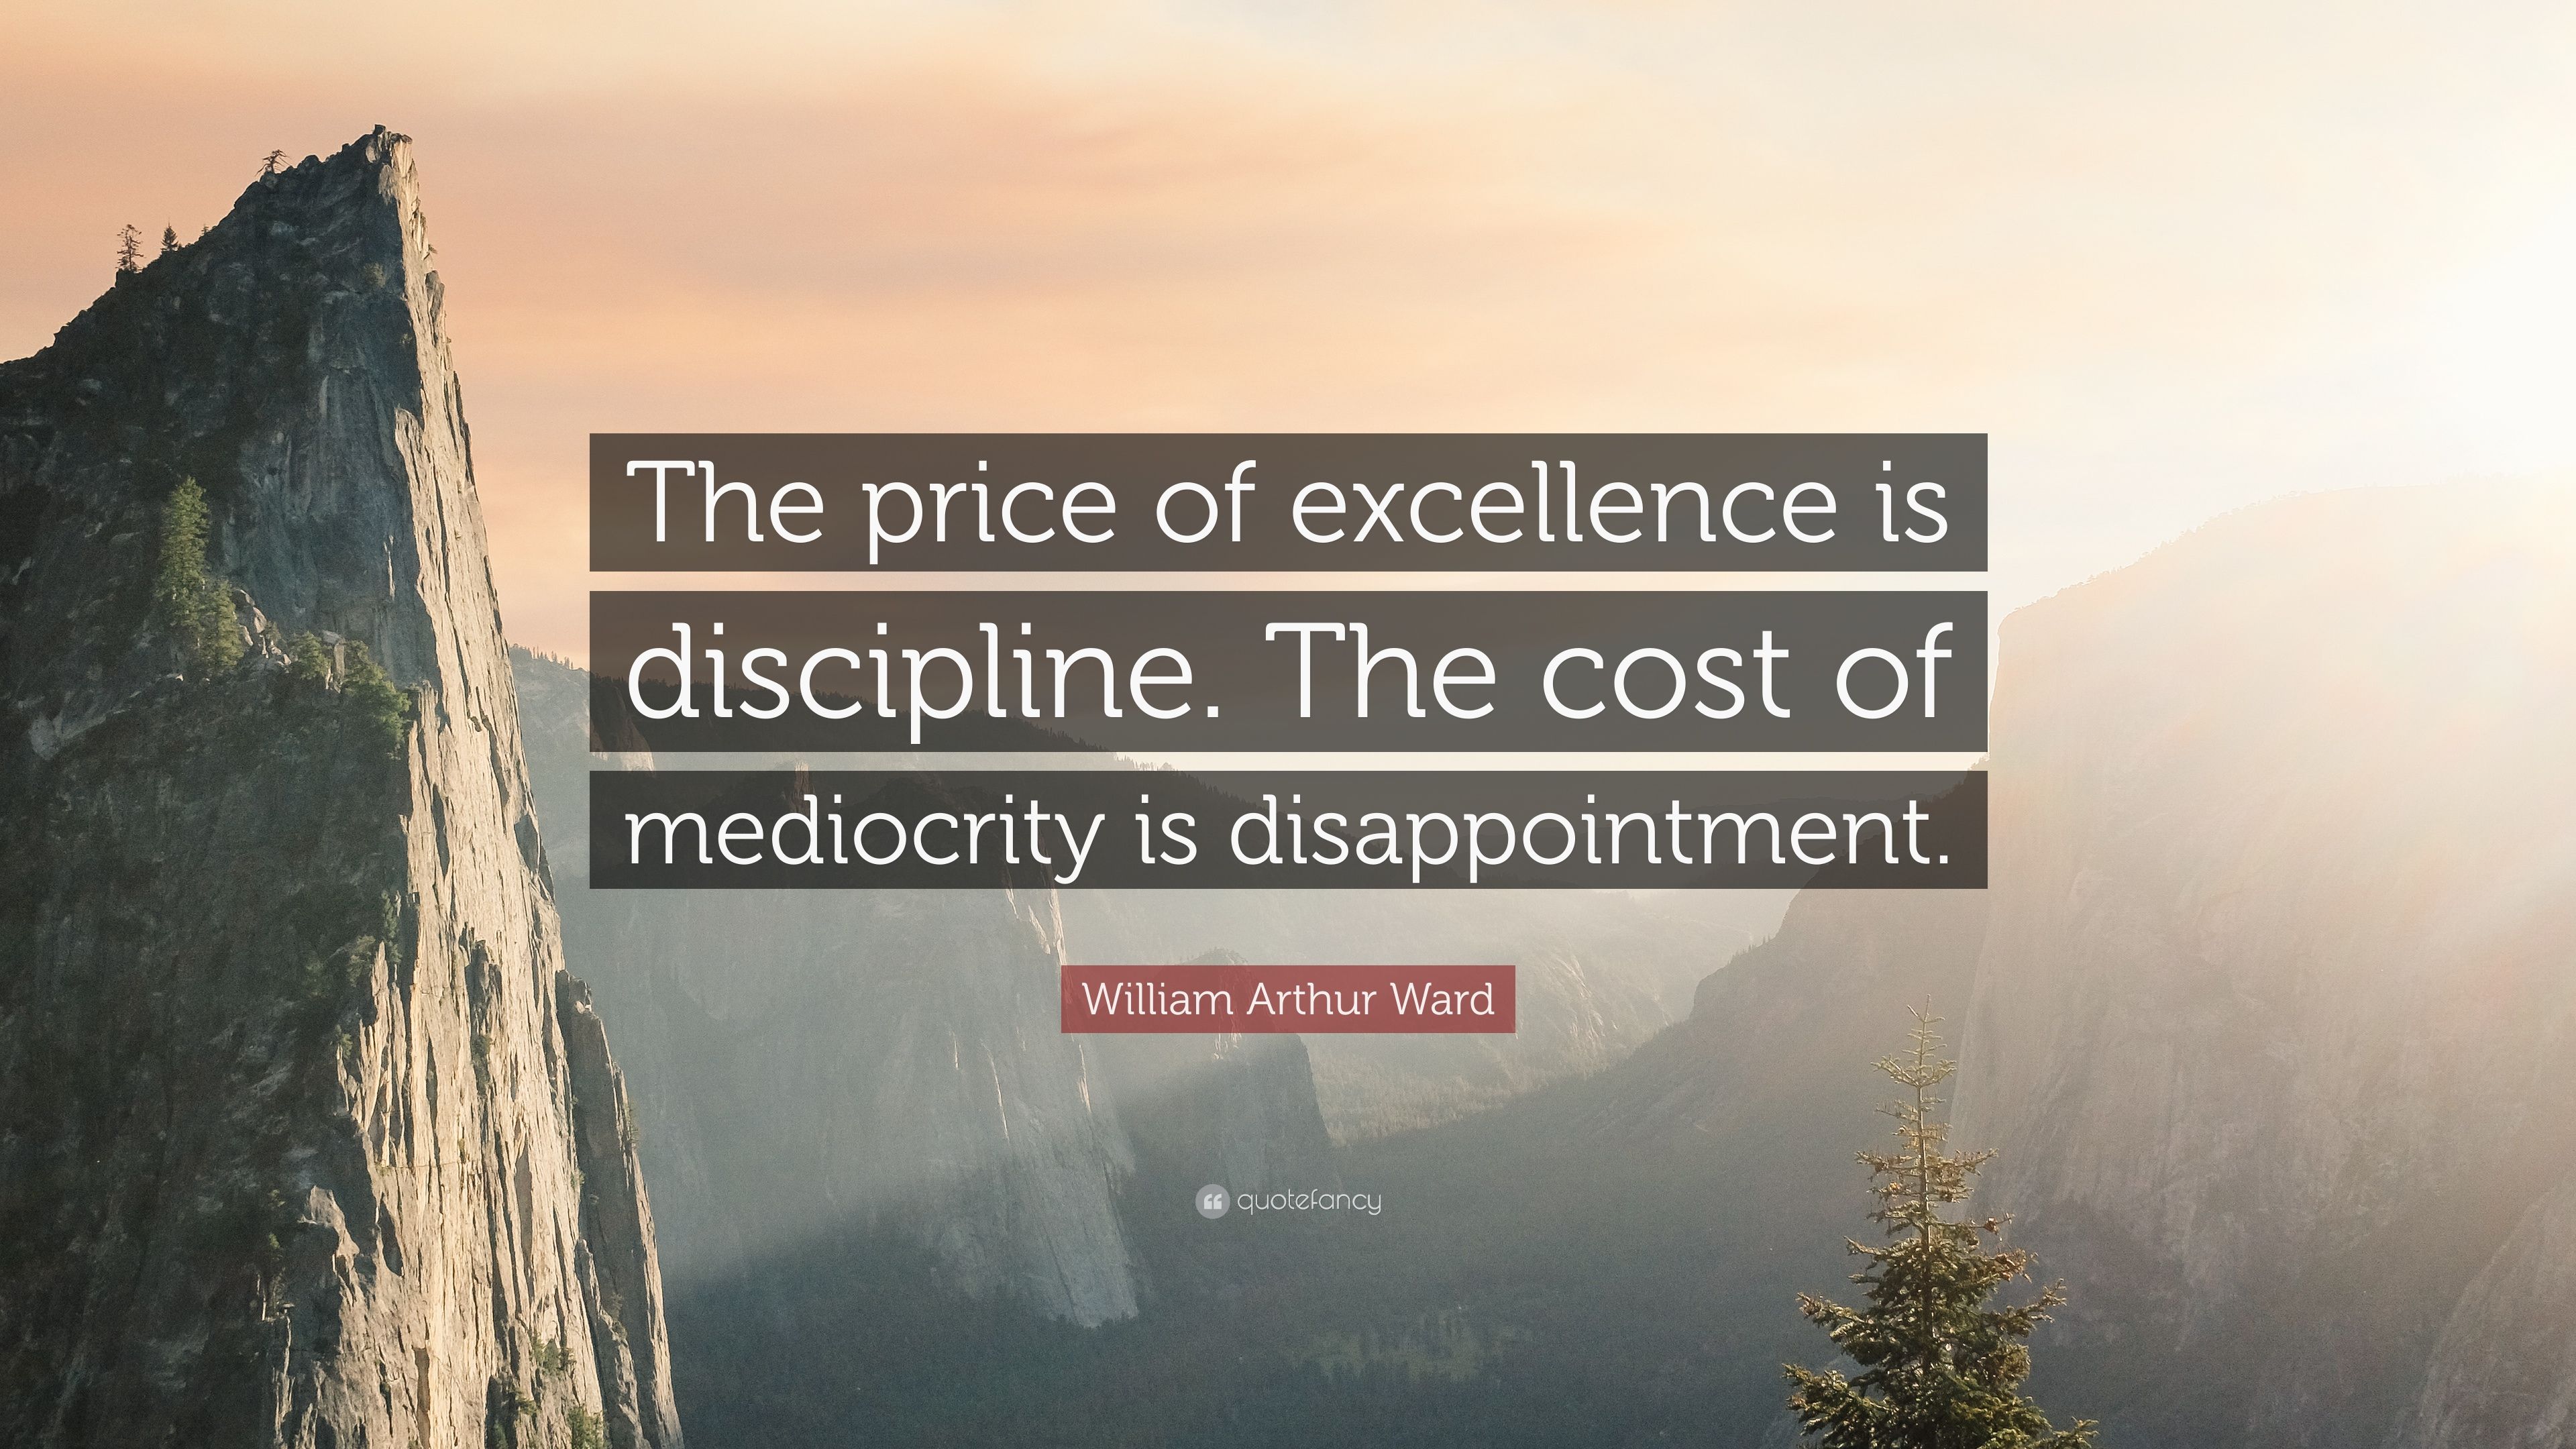 William Arthur Ward Quote: “The price of excellence is discipline. The cost of mediocrity is disappointment.” (12 wallpaper)